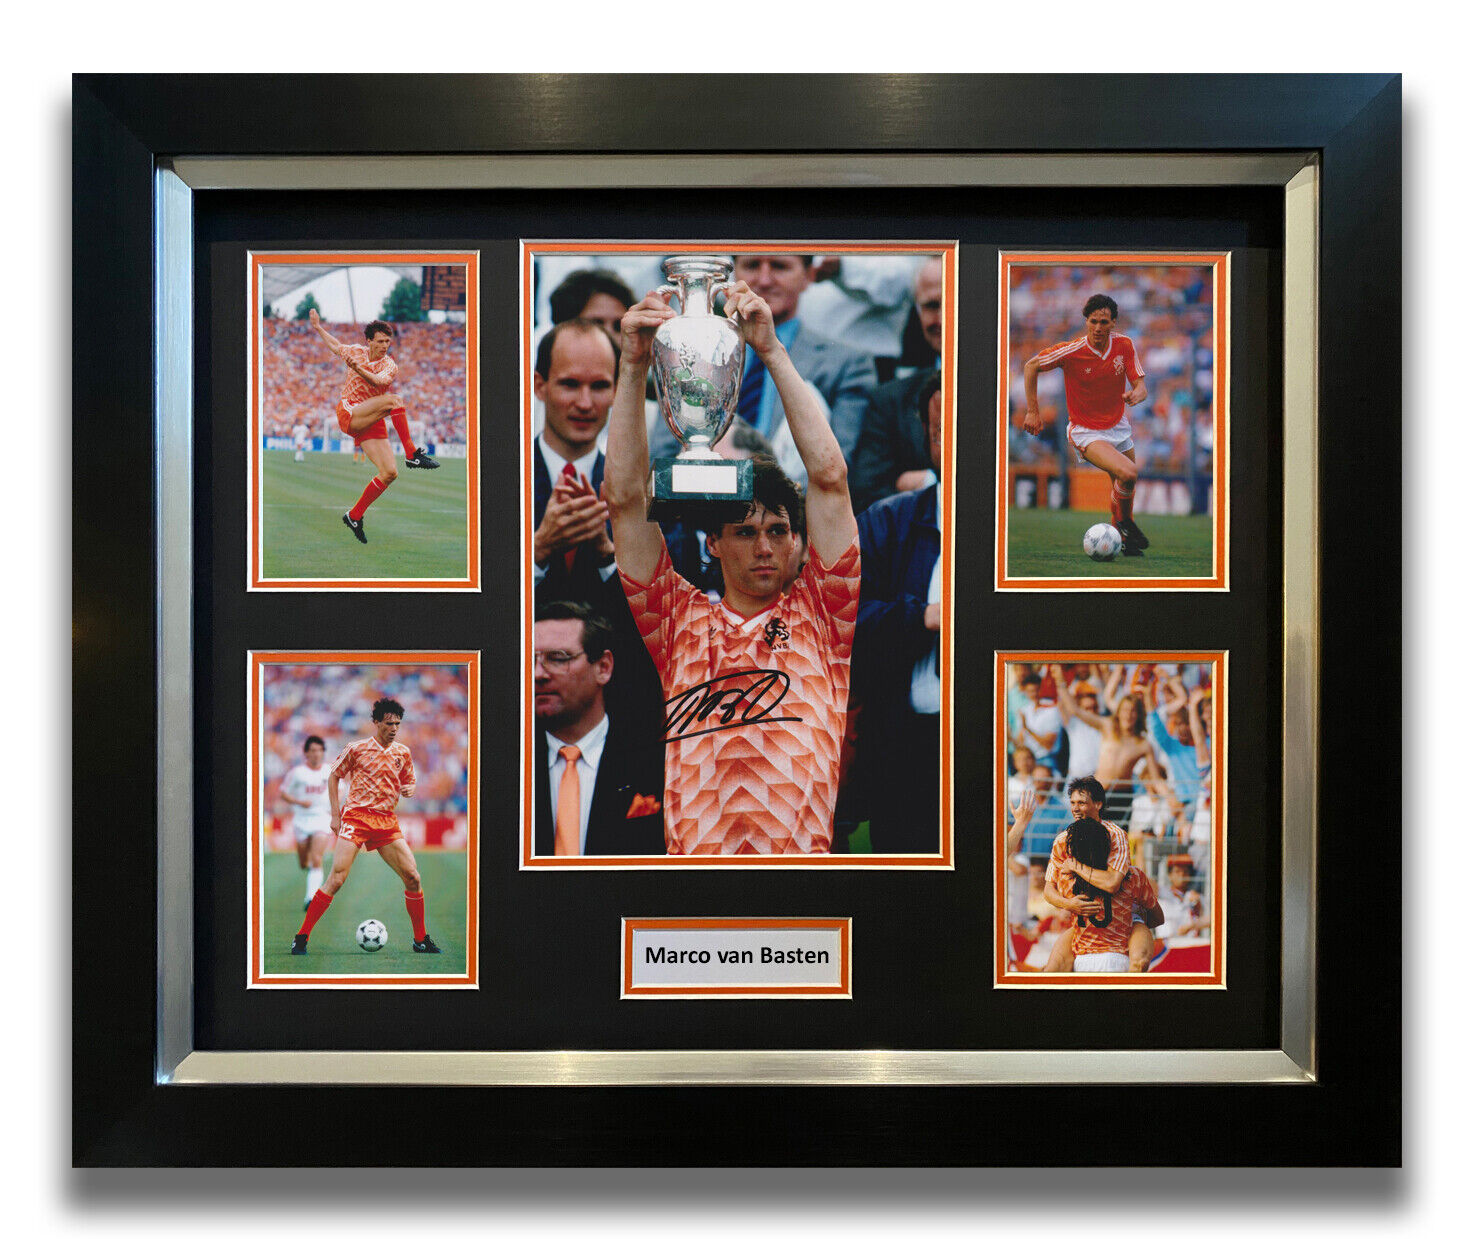 MARCO VAN BASTEN HAND SIGNED FRAMED Photo Poster painting DISPLAY - HOLLAND AUTOGRAPH.